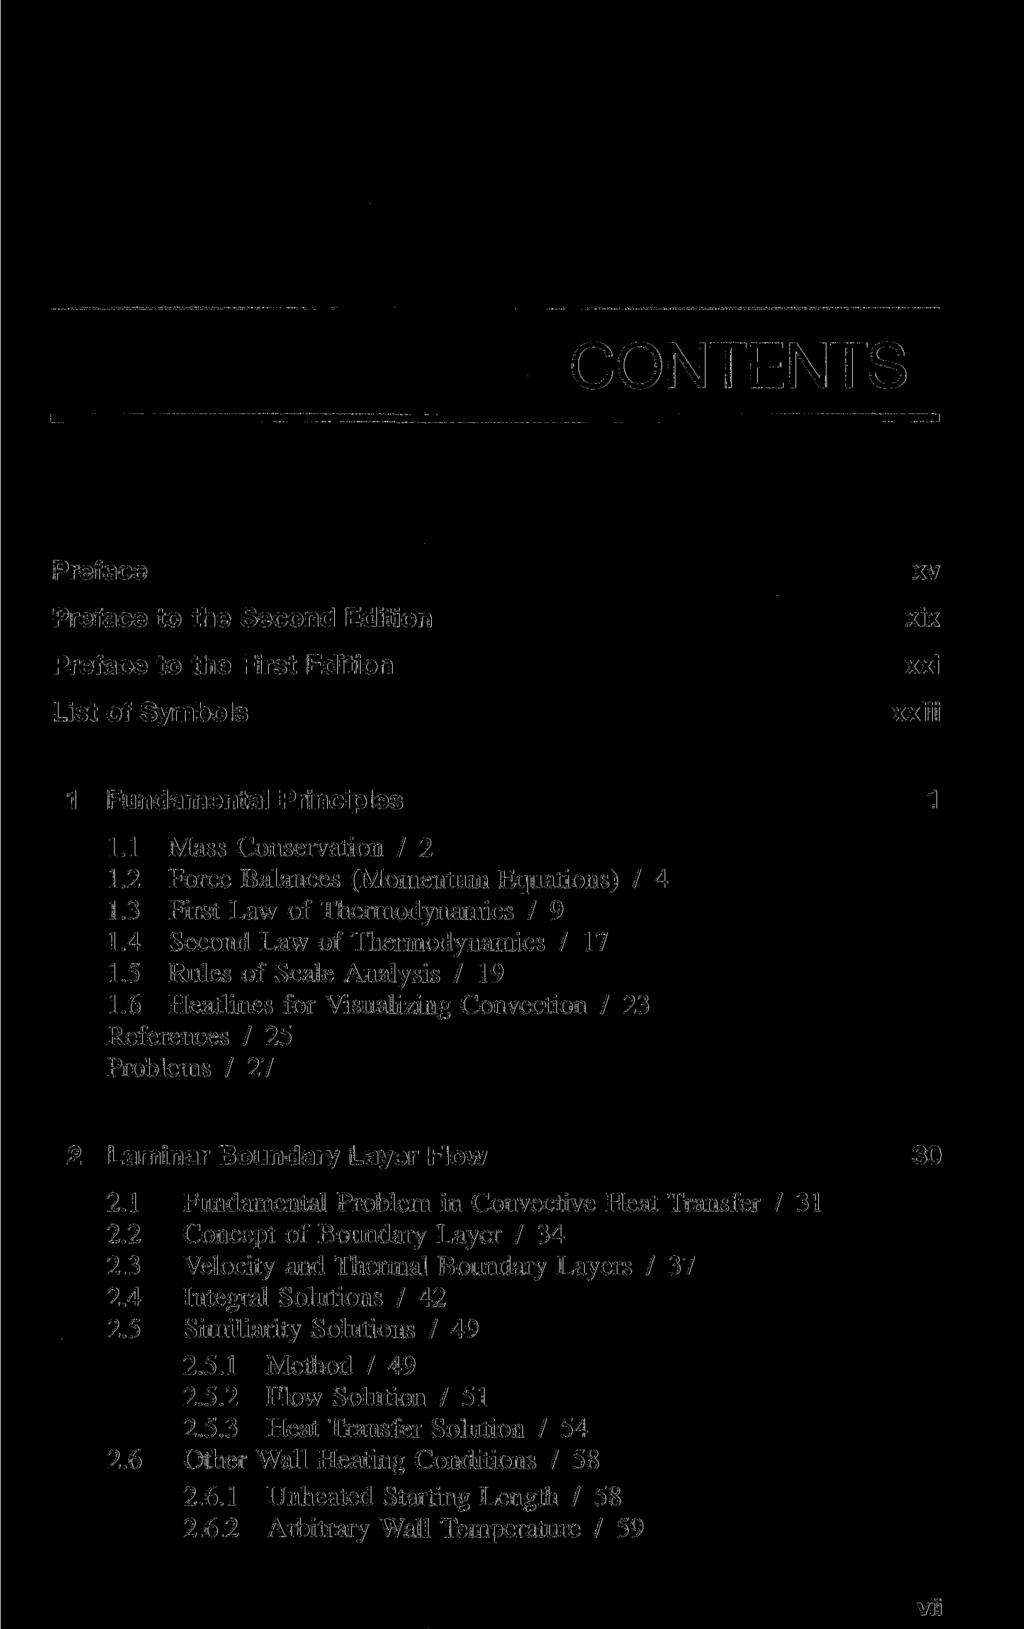 CONTENTS Preface Preface to the Second Edition Preface to the First Edition List of Symbols xv xix xxi xxiii 1 Fundamental Principles 1.1 Mass Conservation / 2 1.